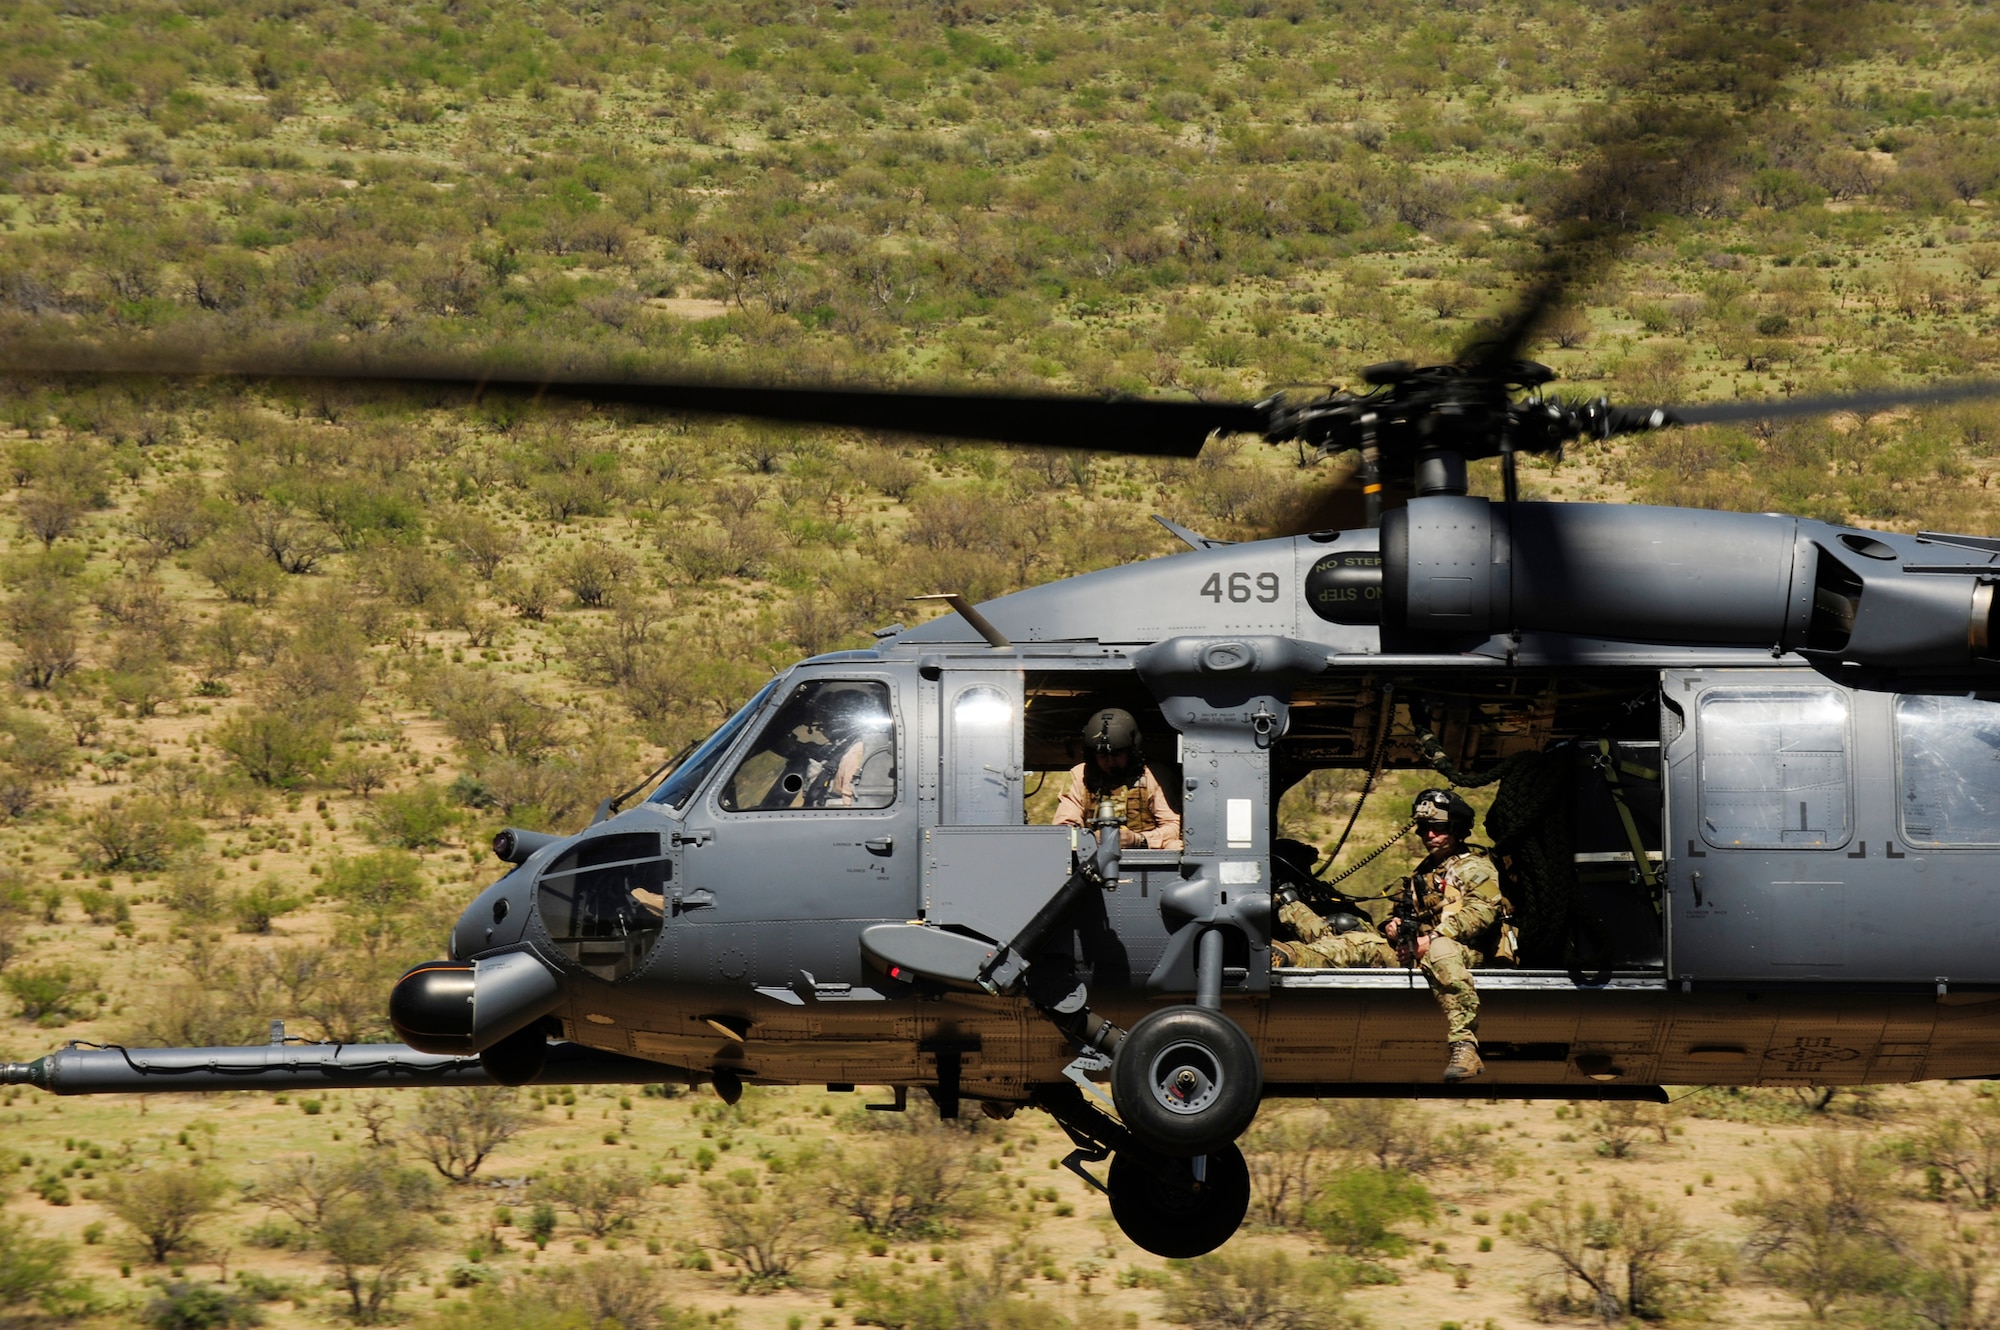 An HH-60 Pave Hawk flies over the desert surrounding Davis-Monthan Air Force Base, Ariz., during Angel Thunder 2010, April 15, 2010. The Pave Hawk crew is from the Alaska Air National Guard's 210th Rescue Squadron at Kulis ANG Base in Anchorage, Alaska. (U.S. Air Force photo/Staff Sgt. Joshua L. DeMotts)